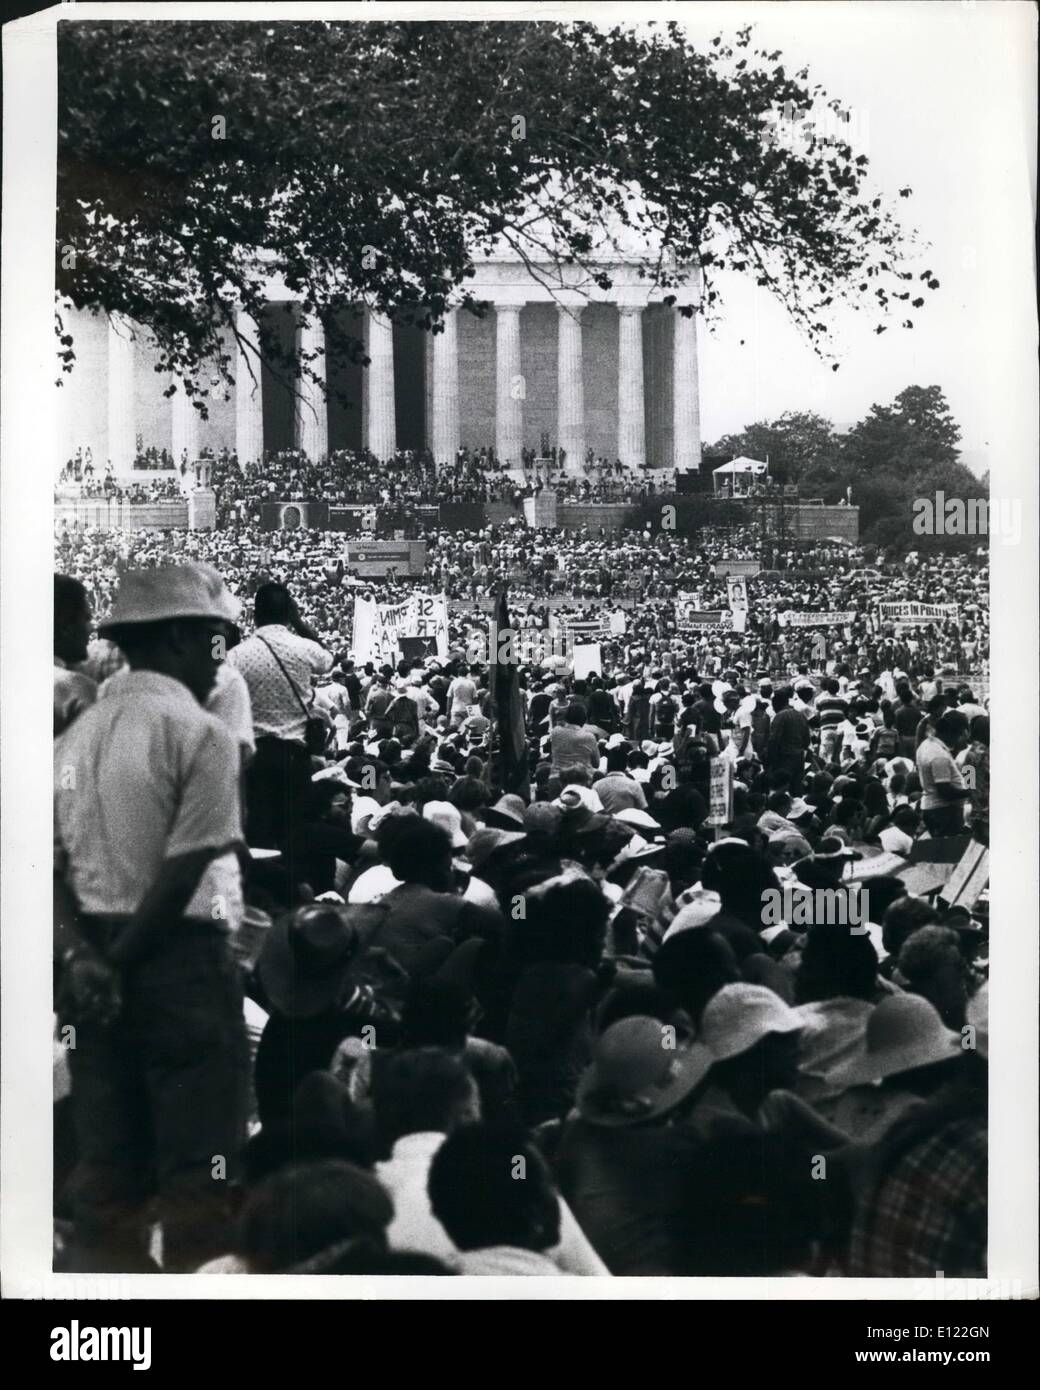 Aug. 08, 1983 - The March on Washington: An over all view of the Marchers at the Lincoln Memorial The Crowd was over 200,000 strong. Stock Photo